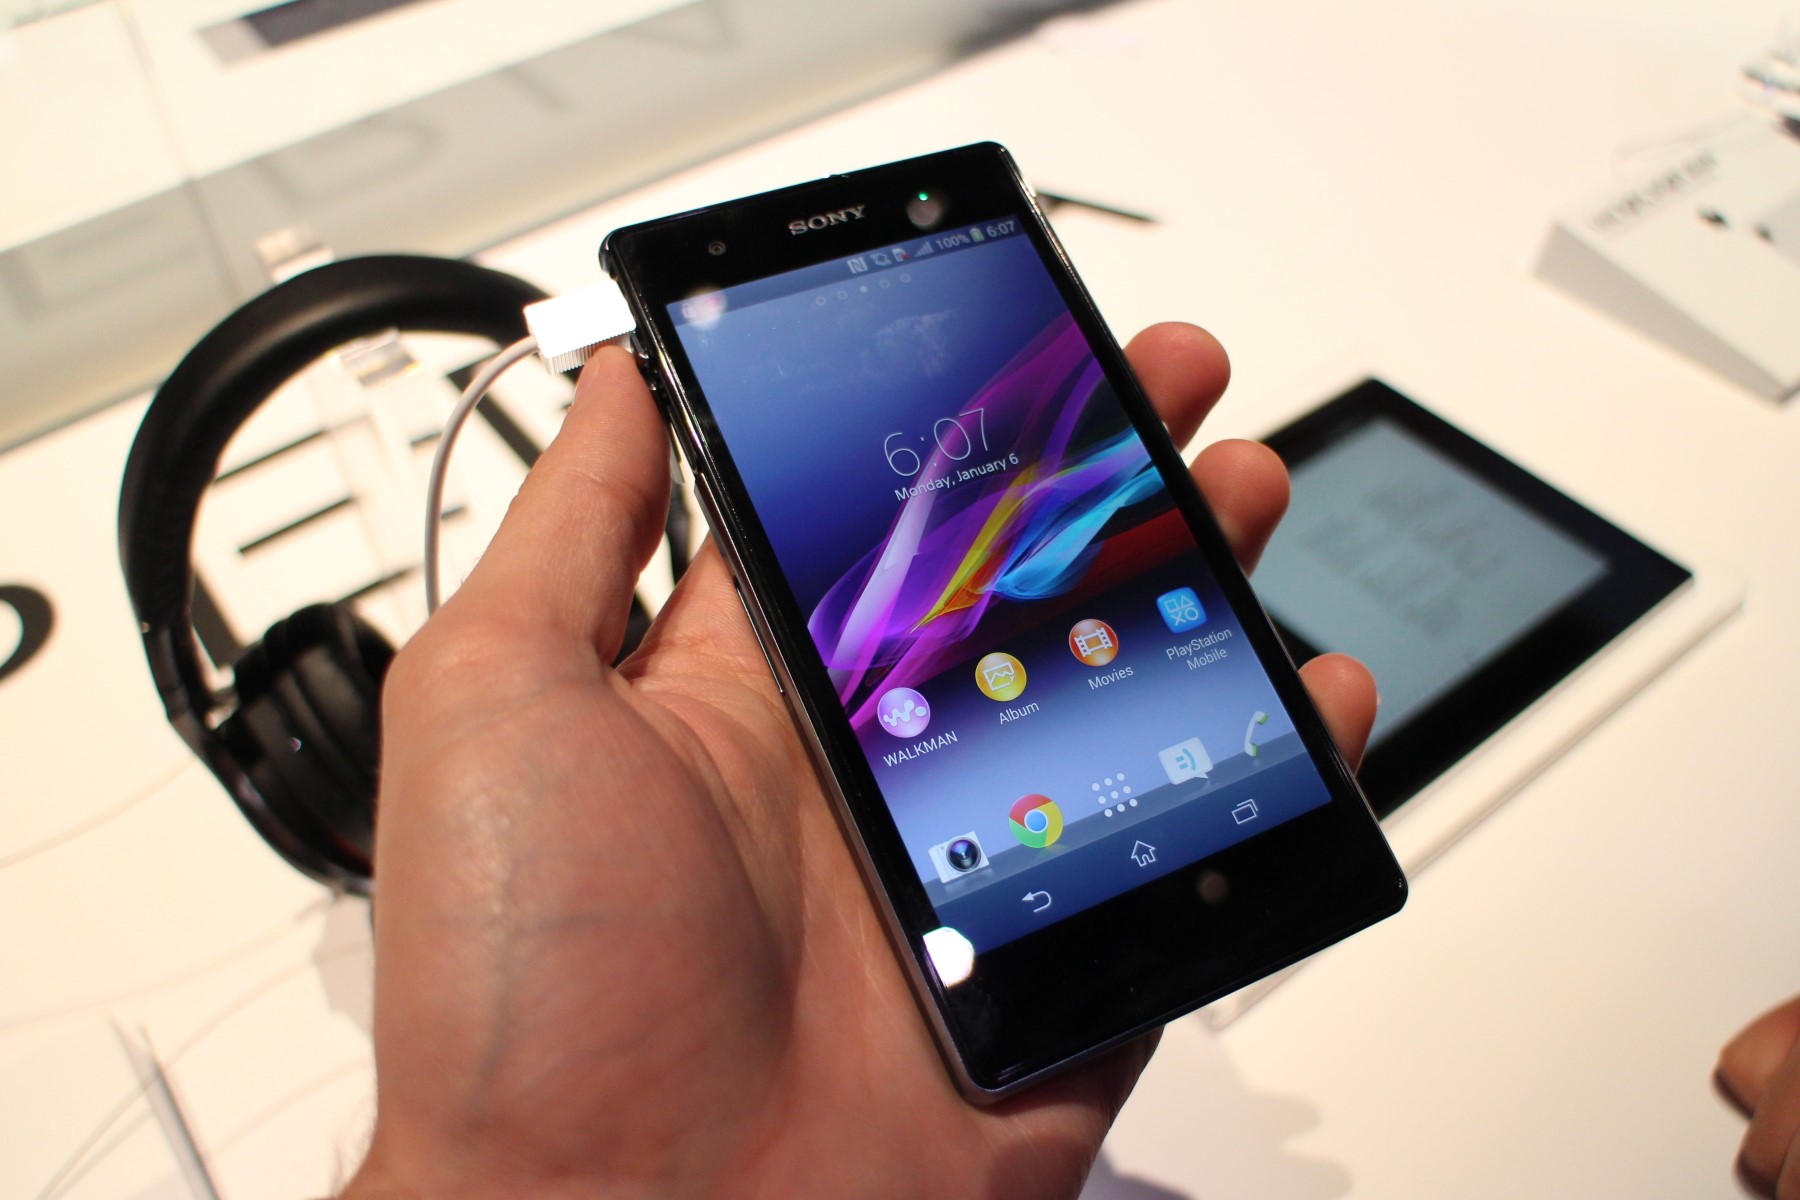 Unlocking Xperia Z T-Mobile: A Quick How-To Guide